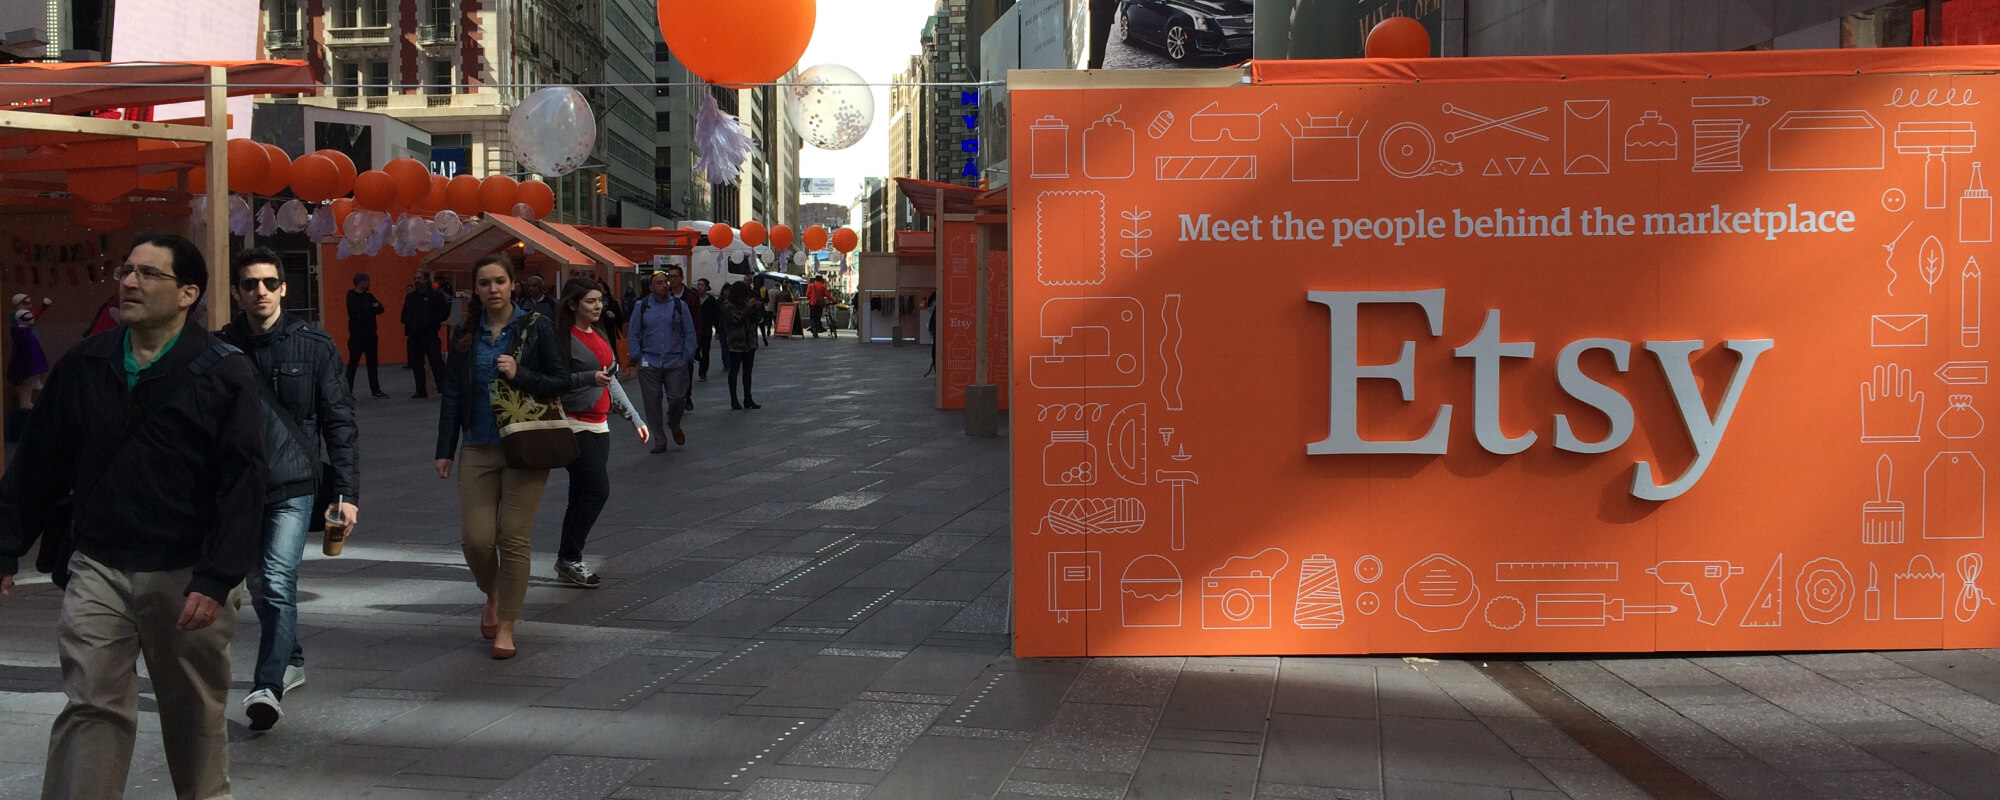 A group of people walking near a large orange sign that reads "Etsy"